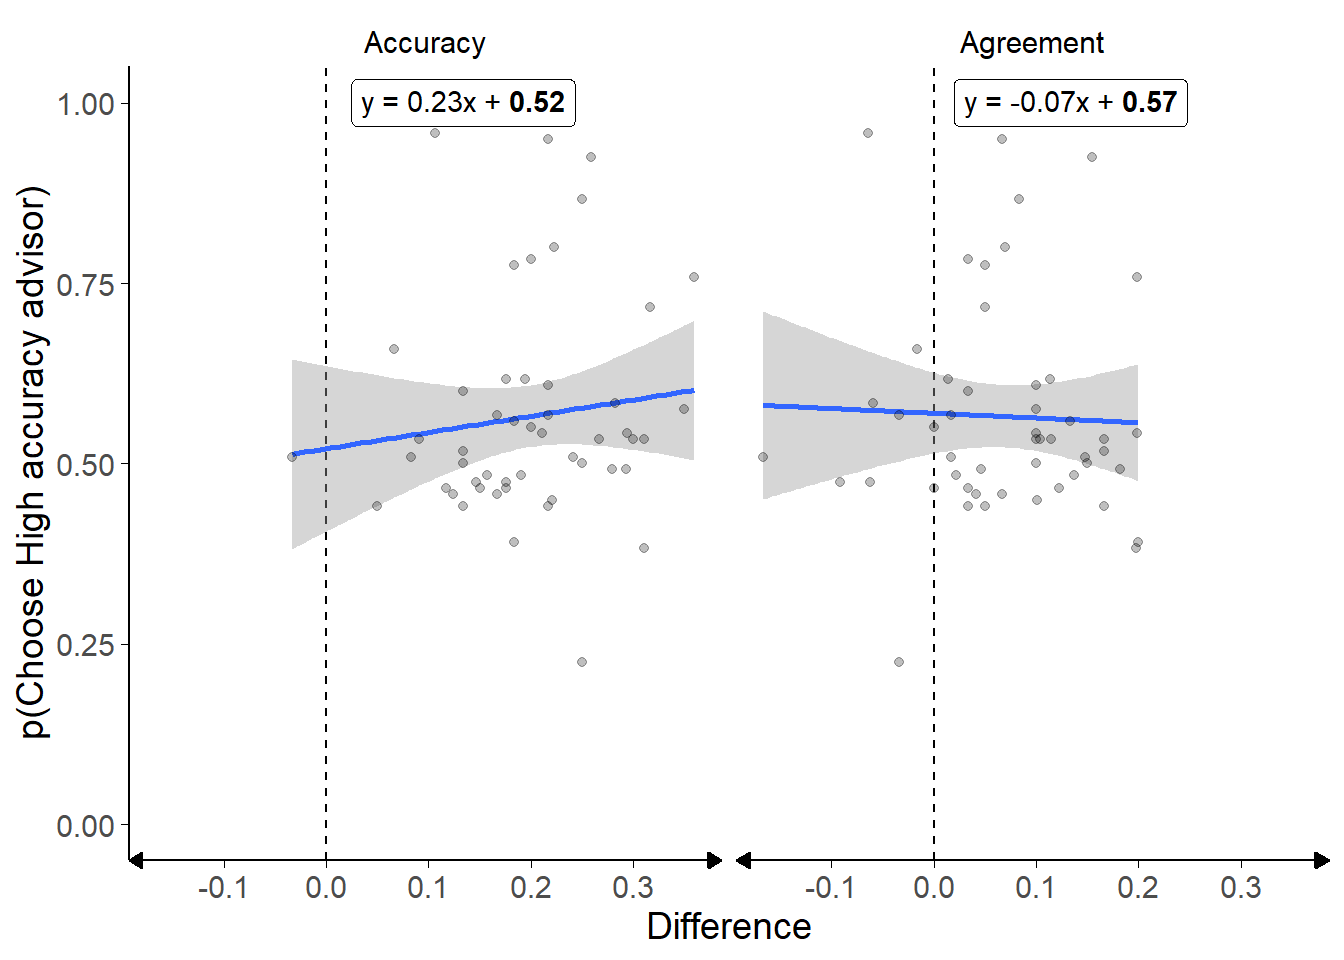 Advisor choice by experience in the Dots task with in/accurate advisors.<br/> Each dot is a participant's proportions. The difference in accuracy rates is calculated as the proportion of correct answers seen from the High accuracy advisor minus the proportion of correct answers seen from the Low accuracy advisor, and the difference in agreement rates similarly for agreement. The participants did not receive feedback on the correct answers.